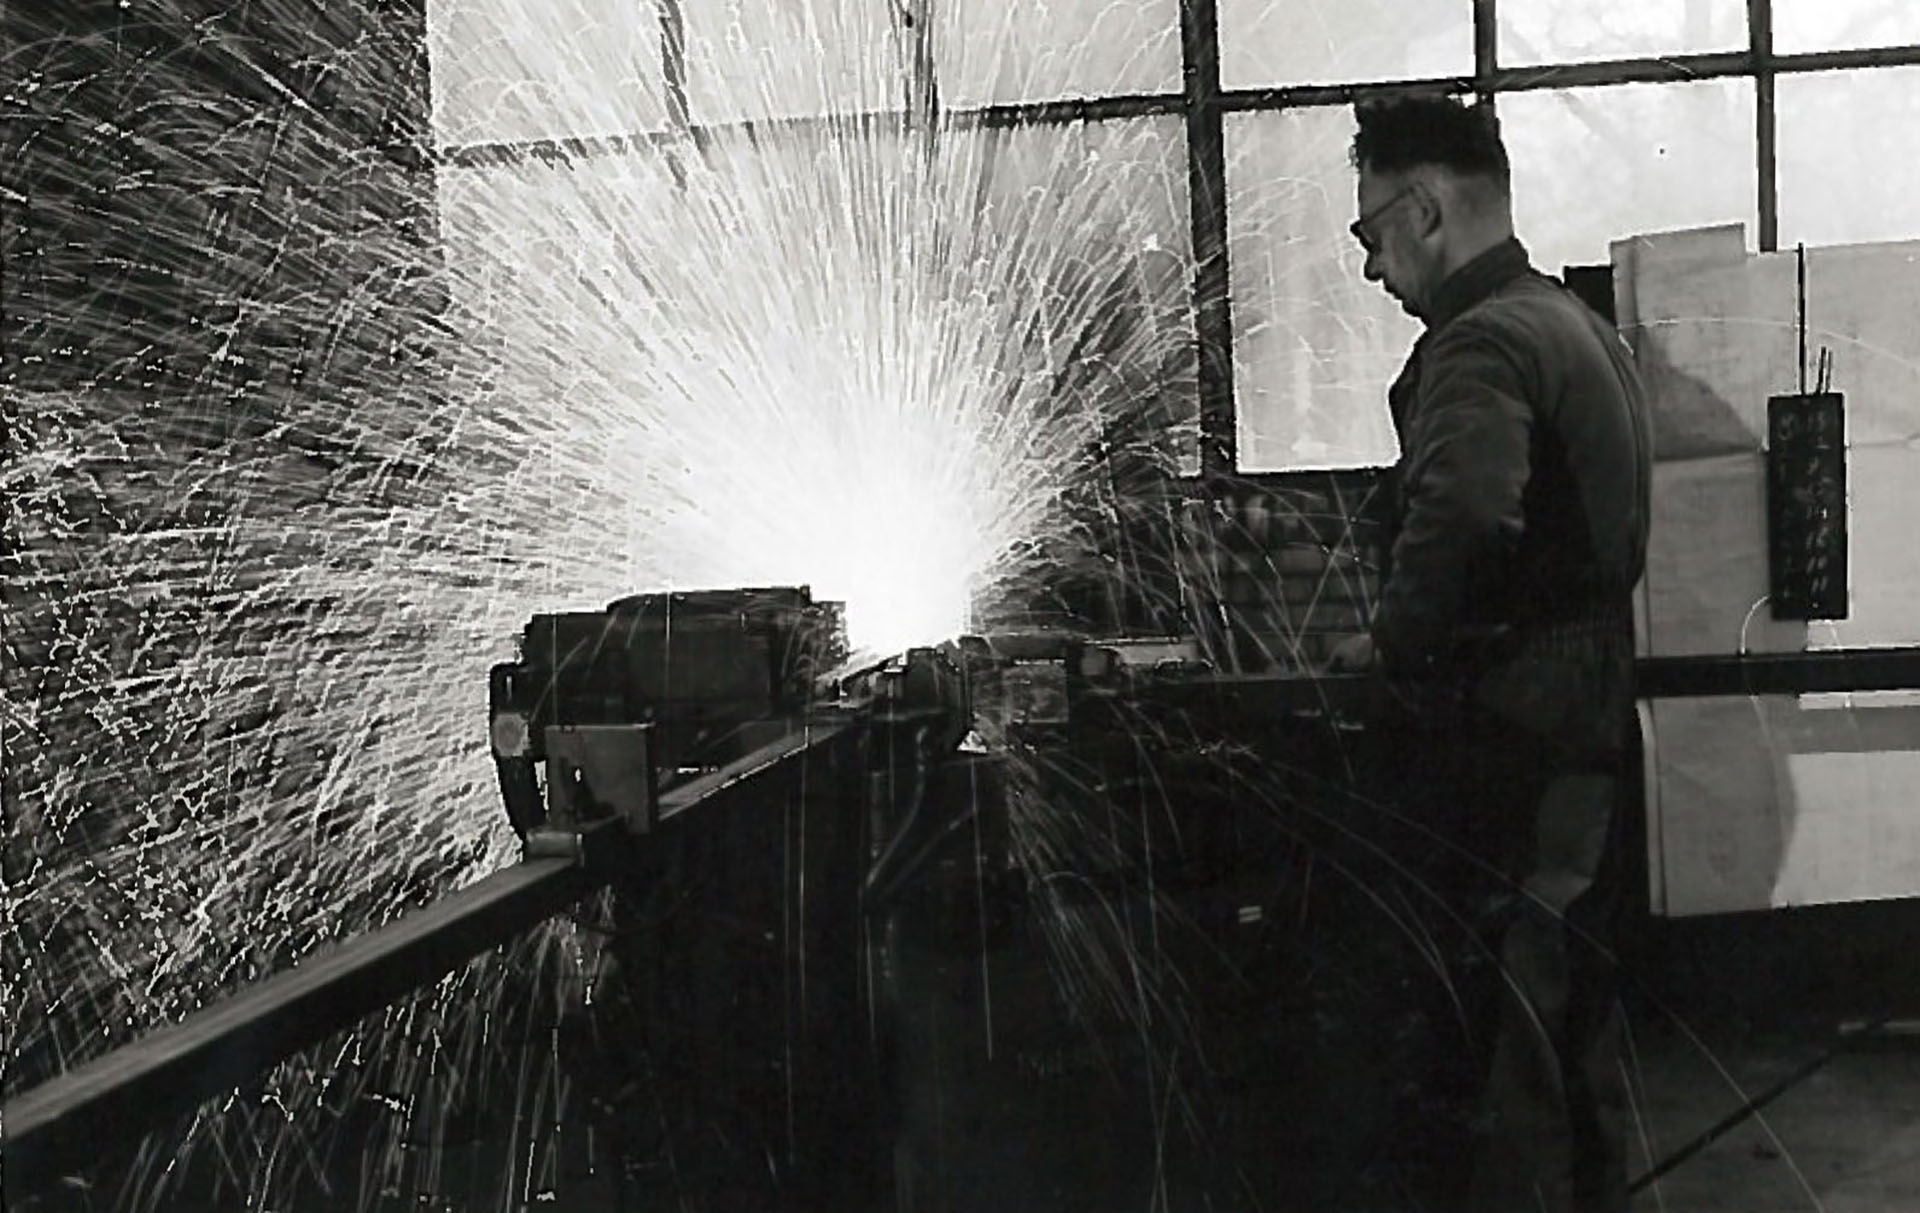 Craftsman welder from MHB in the 1930s